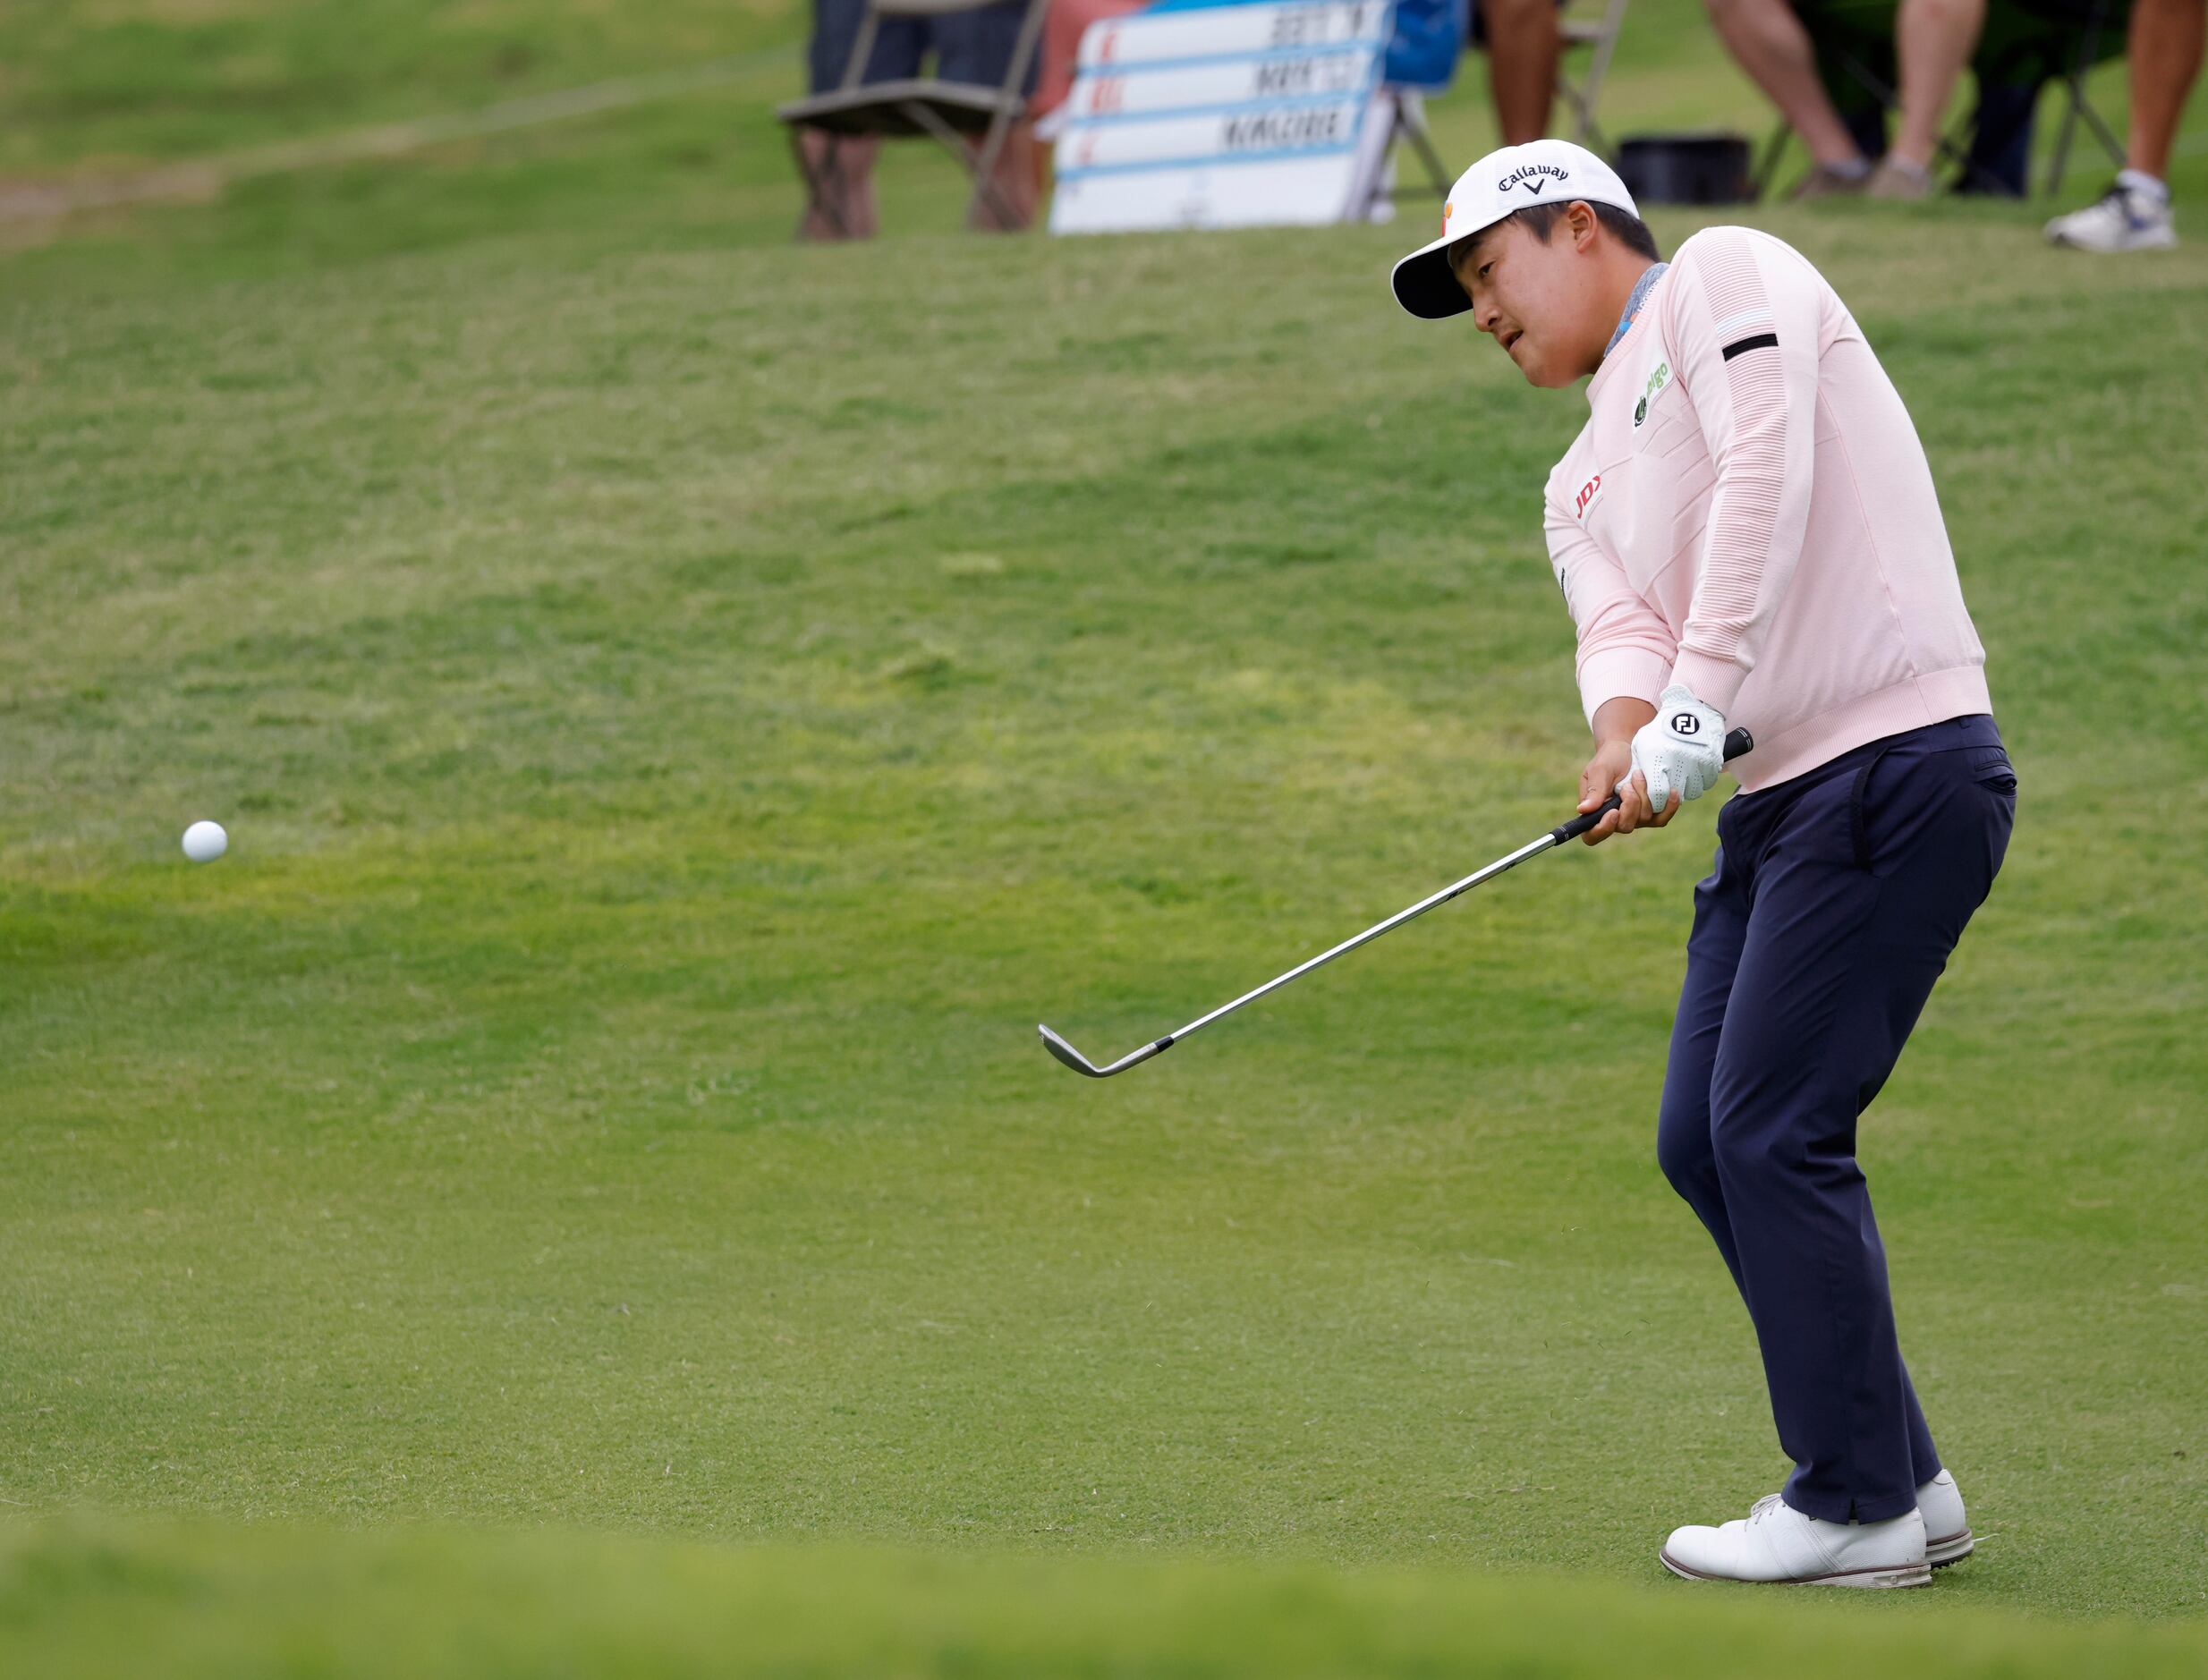 Kyoung-Hoon Lee hits on the green on the 18th hole during round 2 of the AT&T Byron Nelson ...